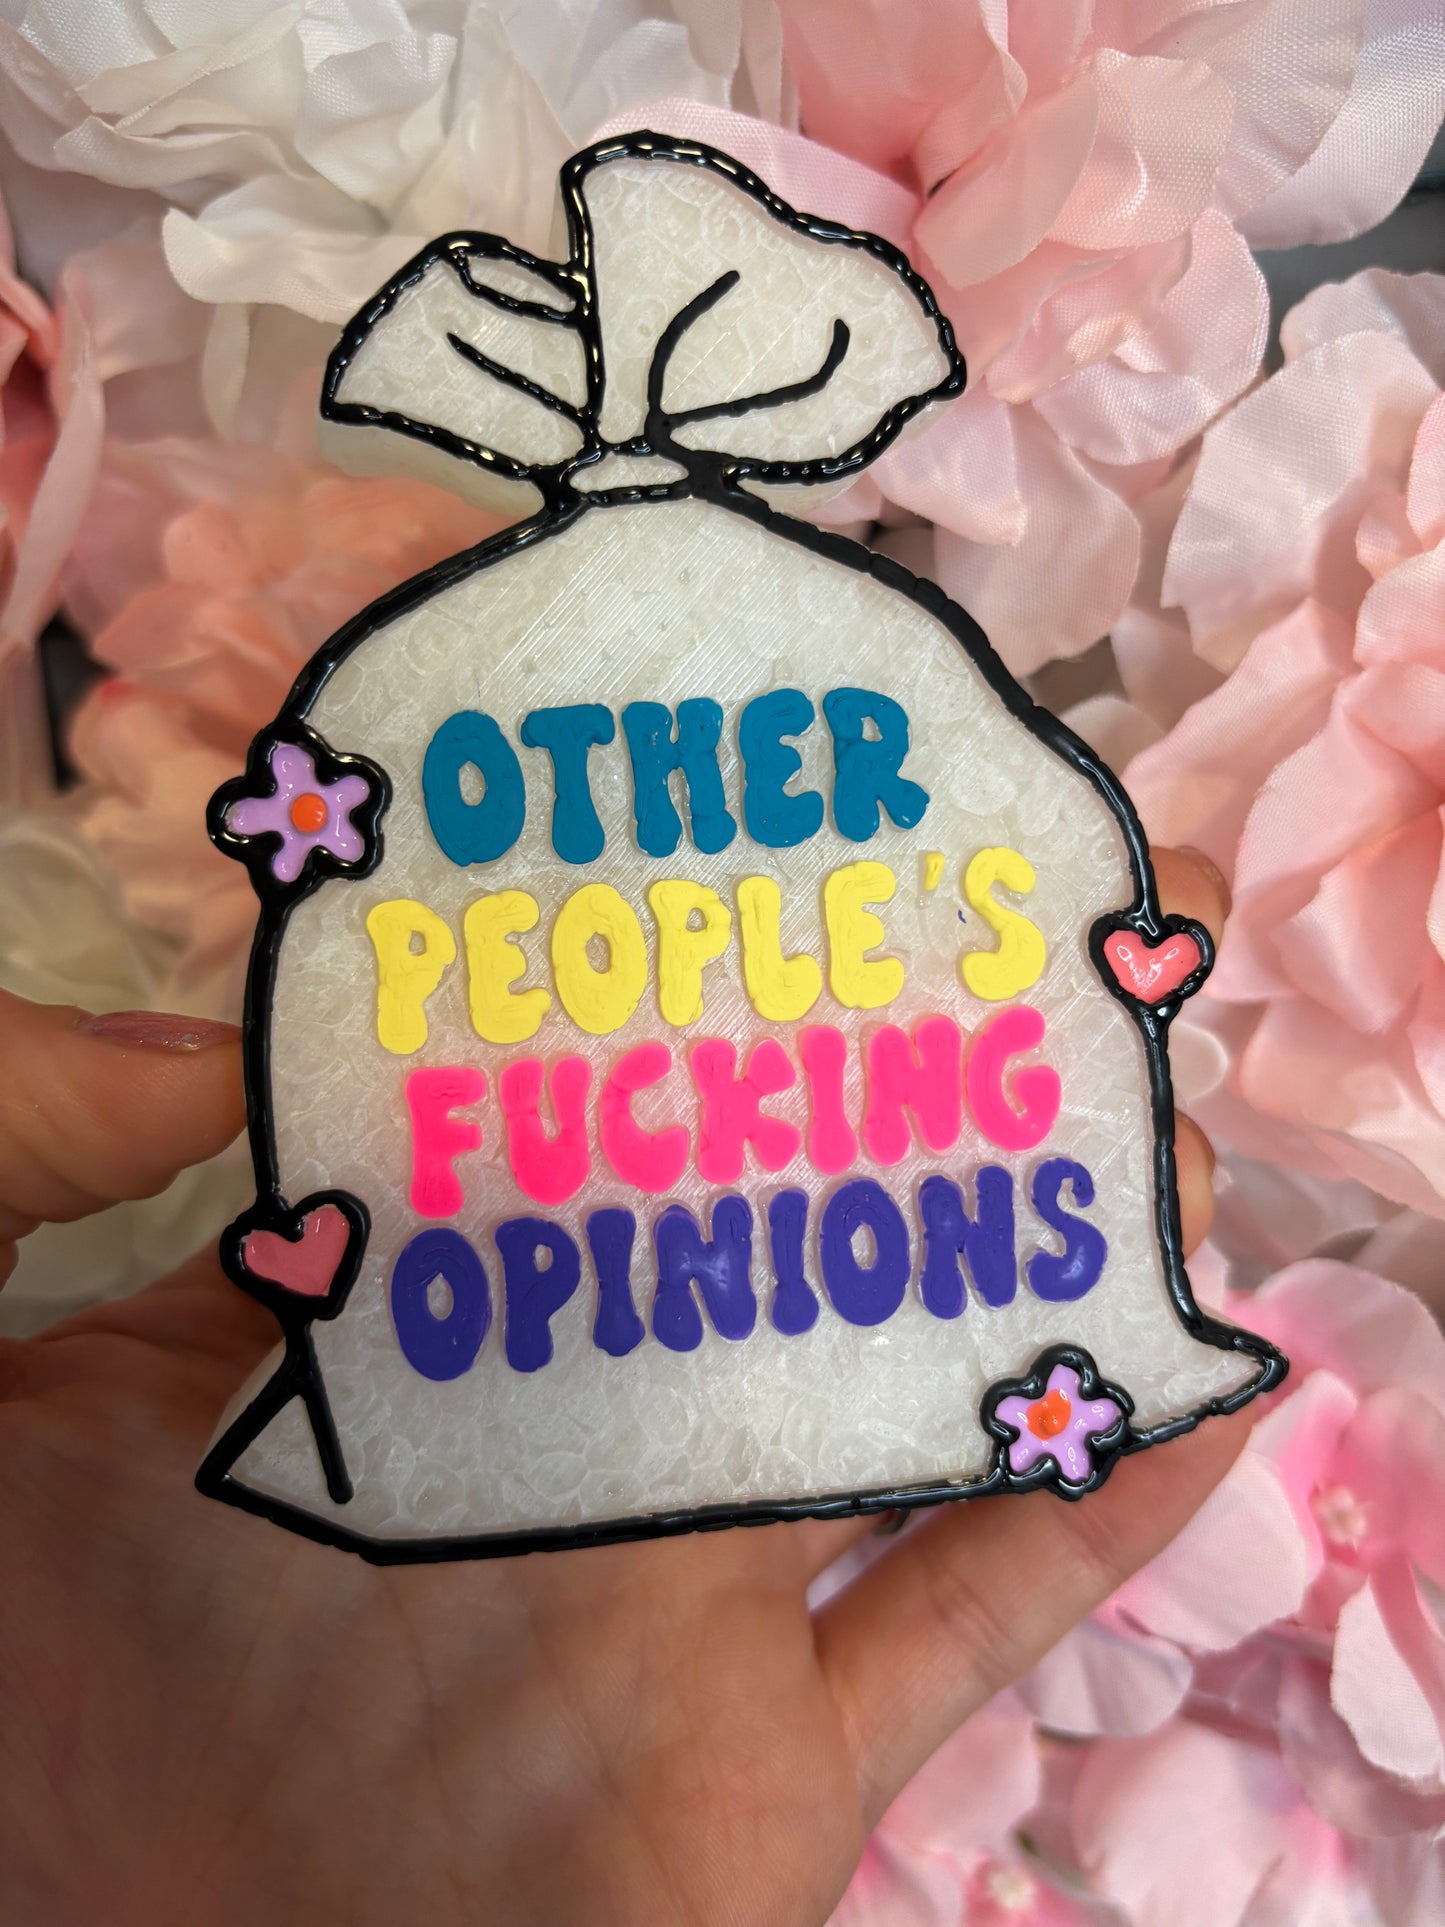 Other people’s opinions